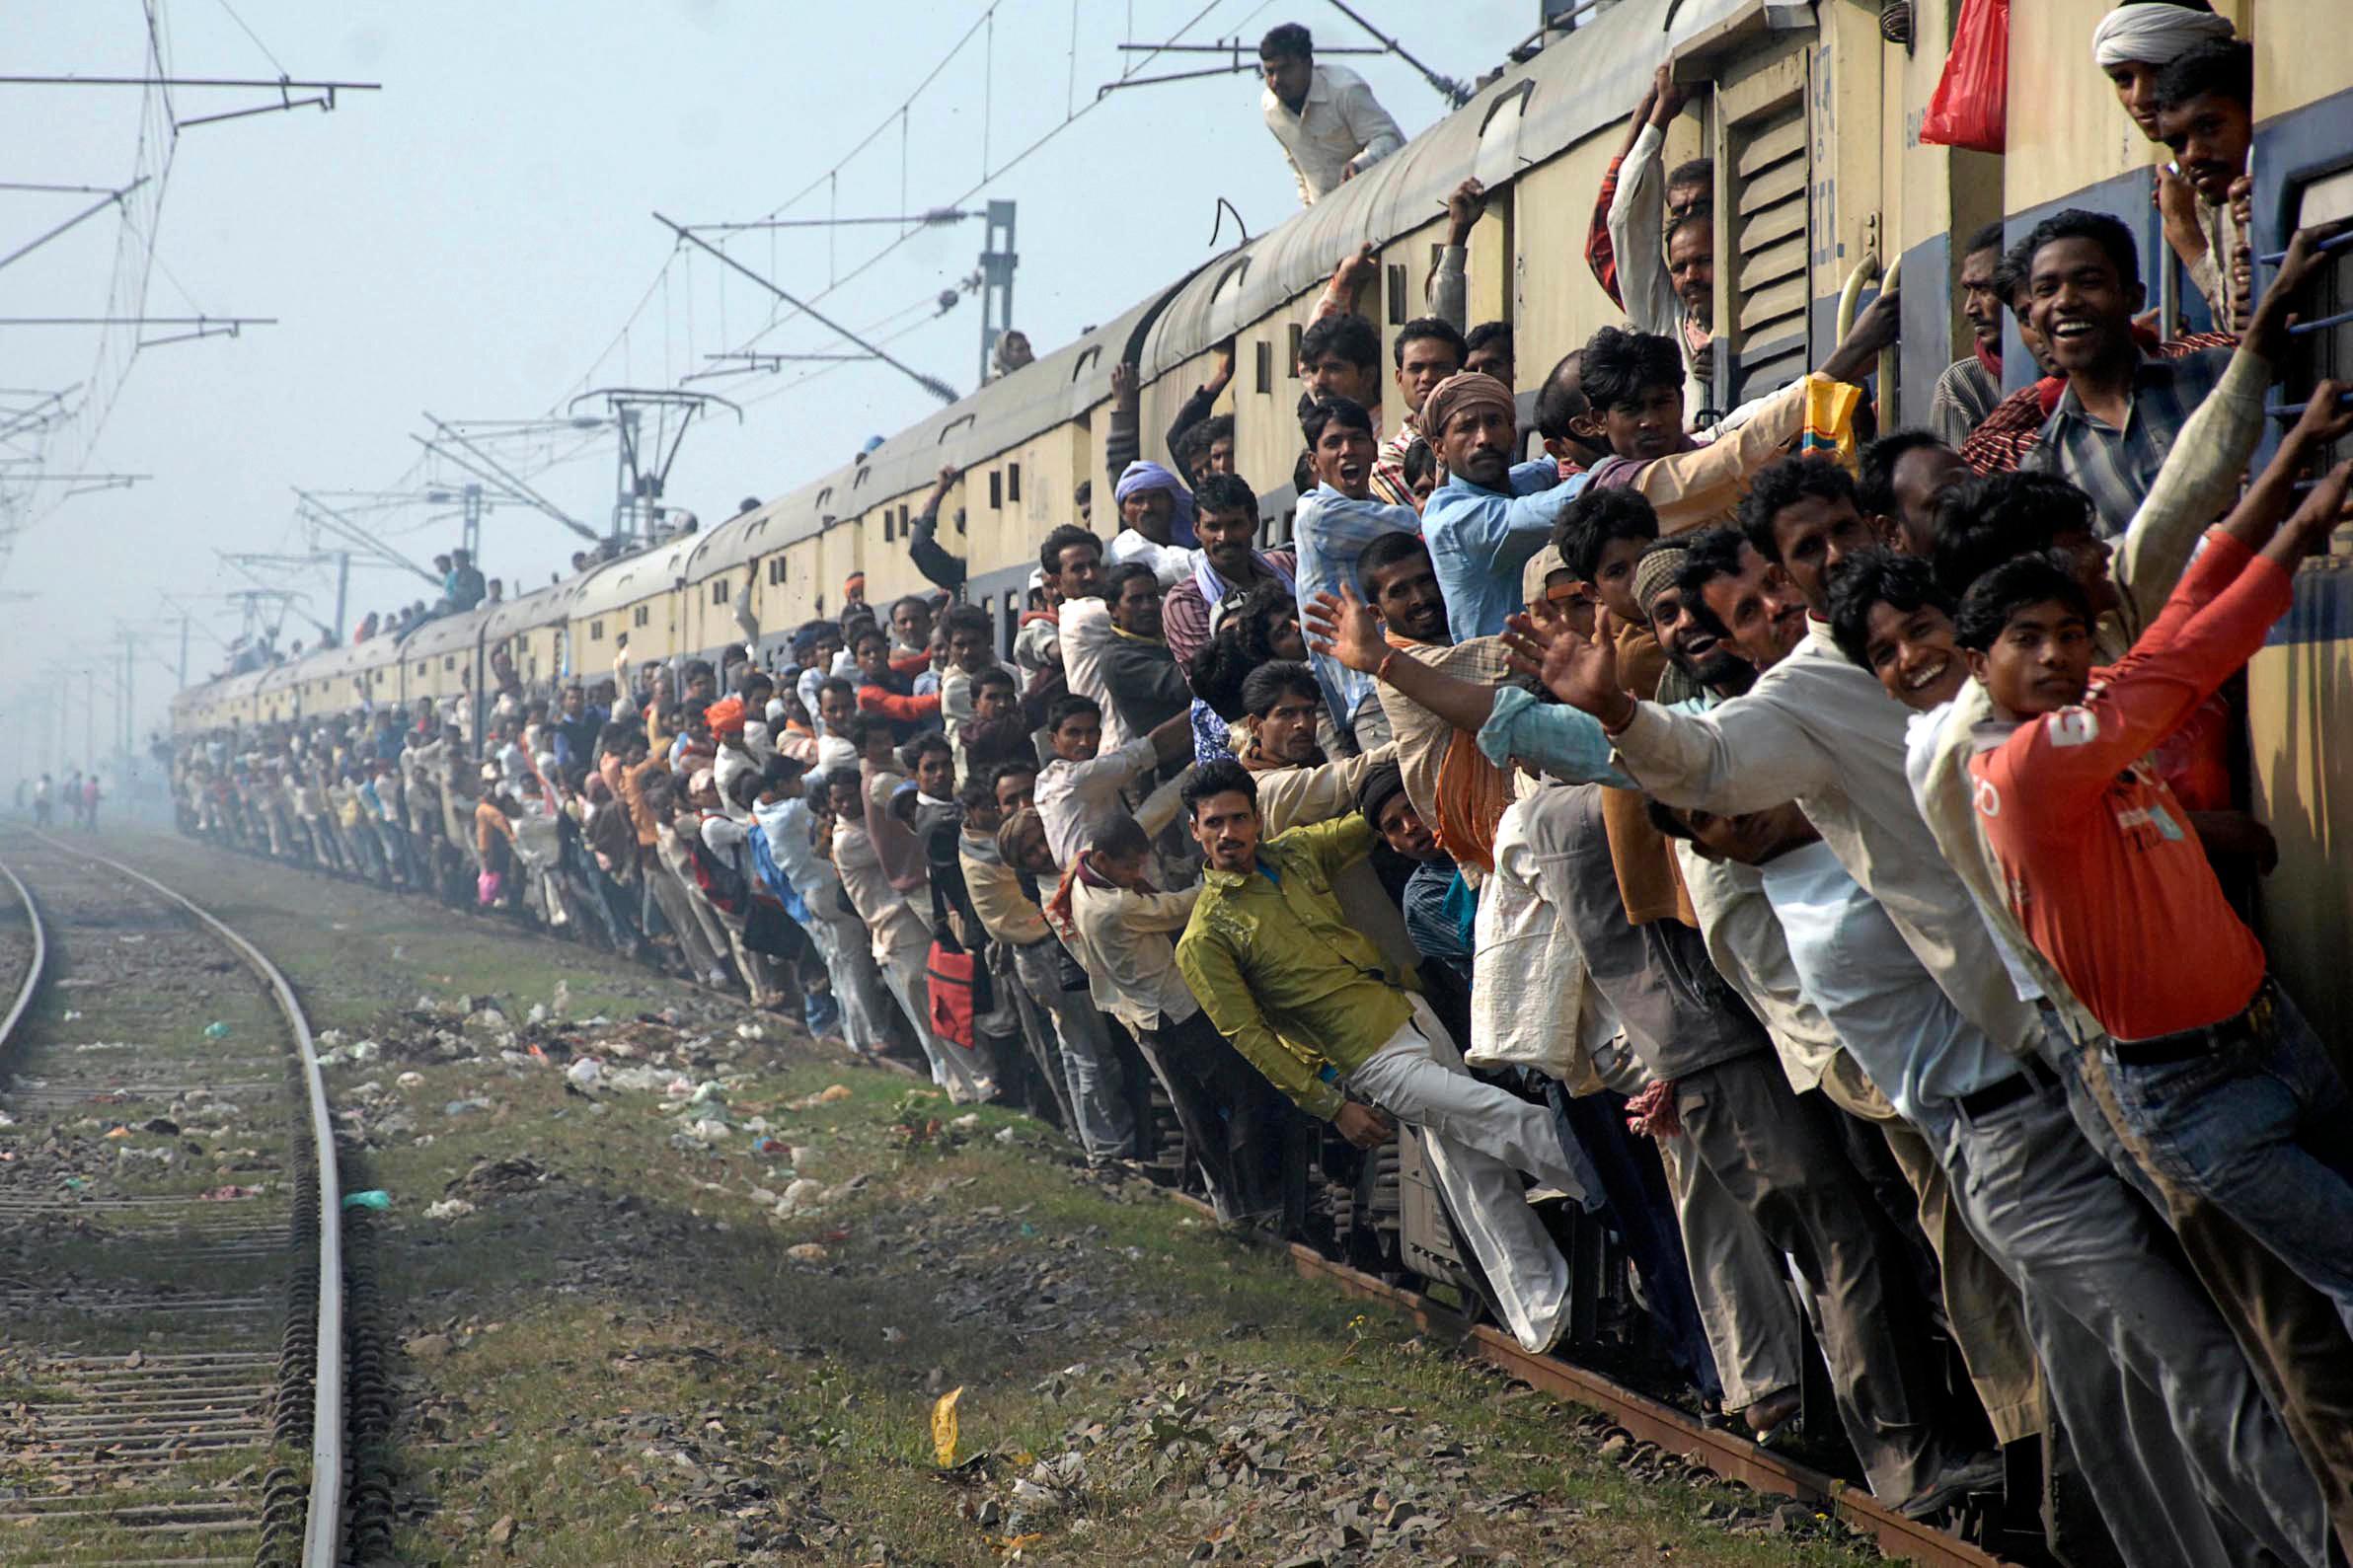 Depict image - overloaded moving train in India